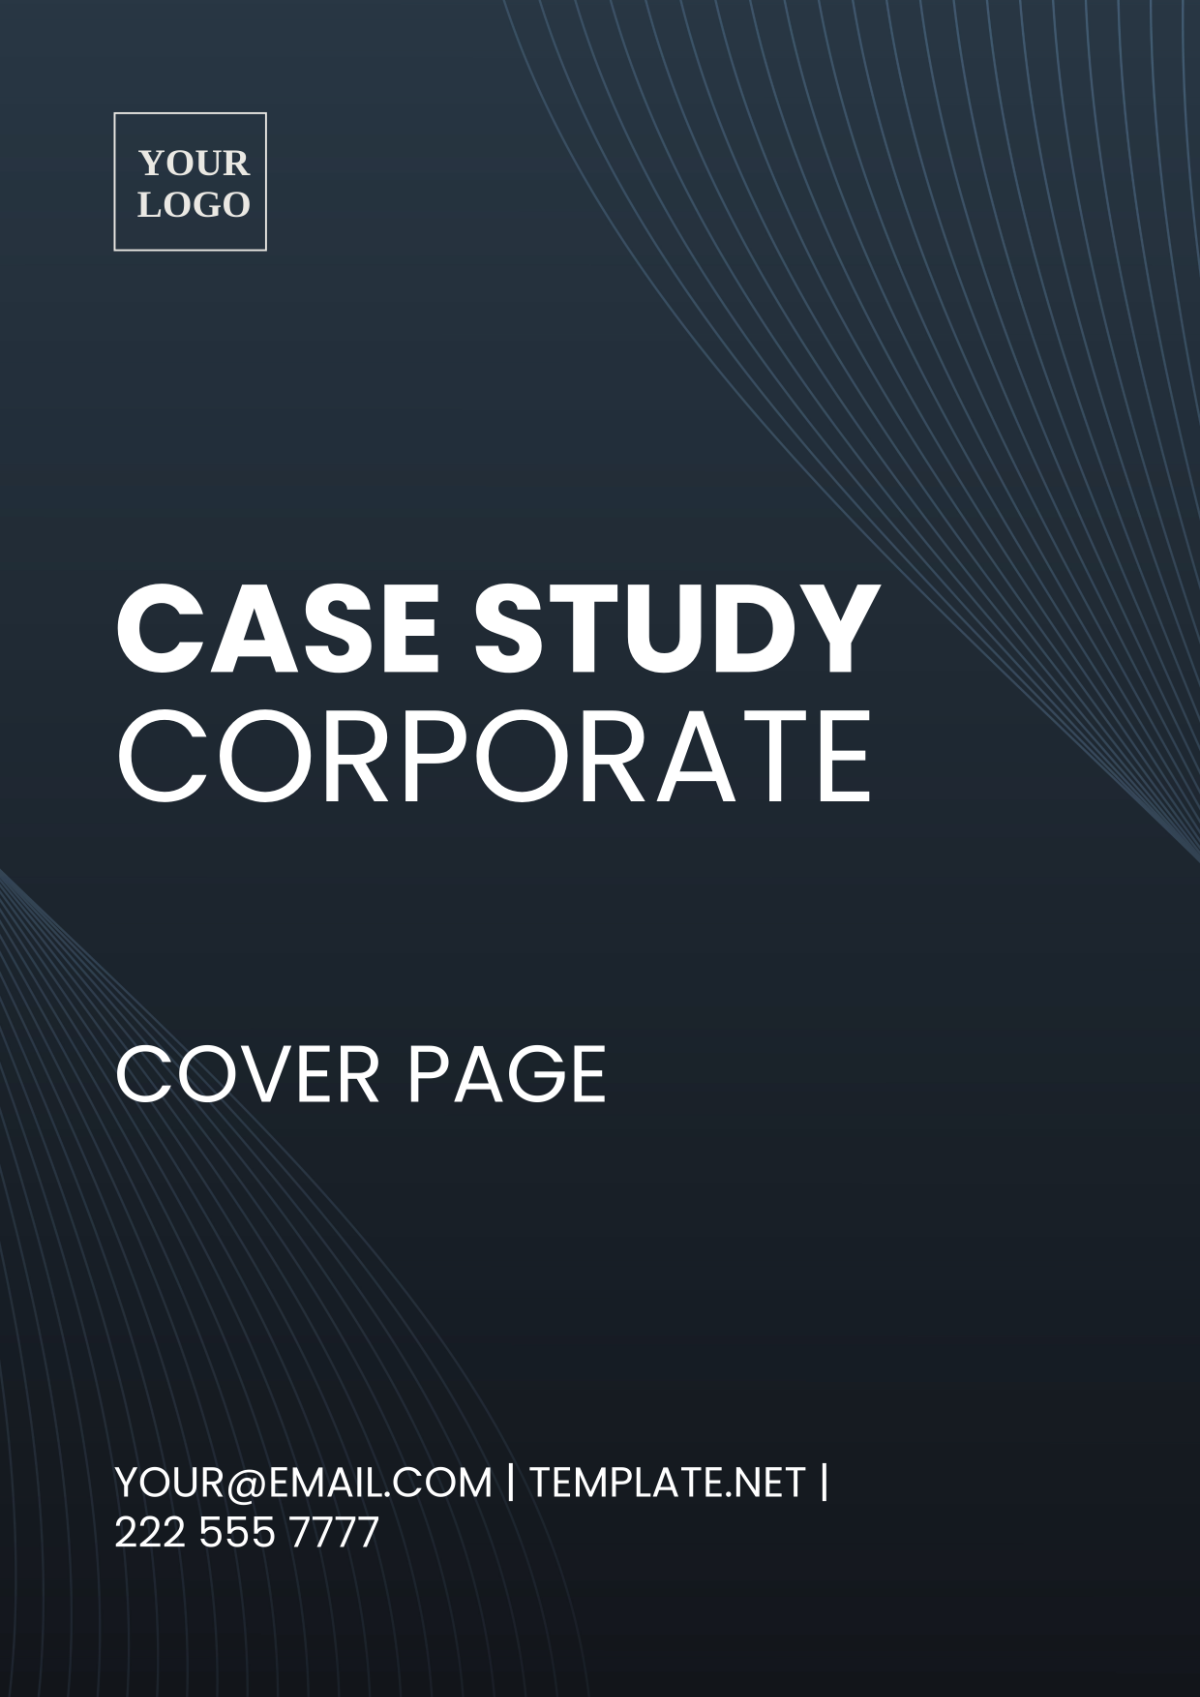 Case Study Corporate Cover Page Template